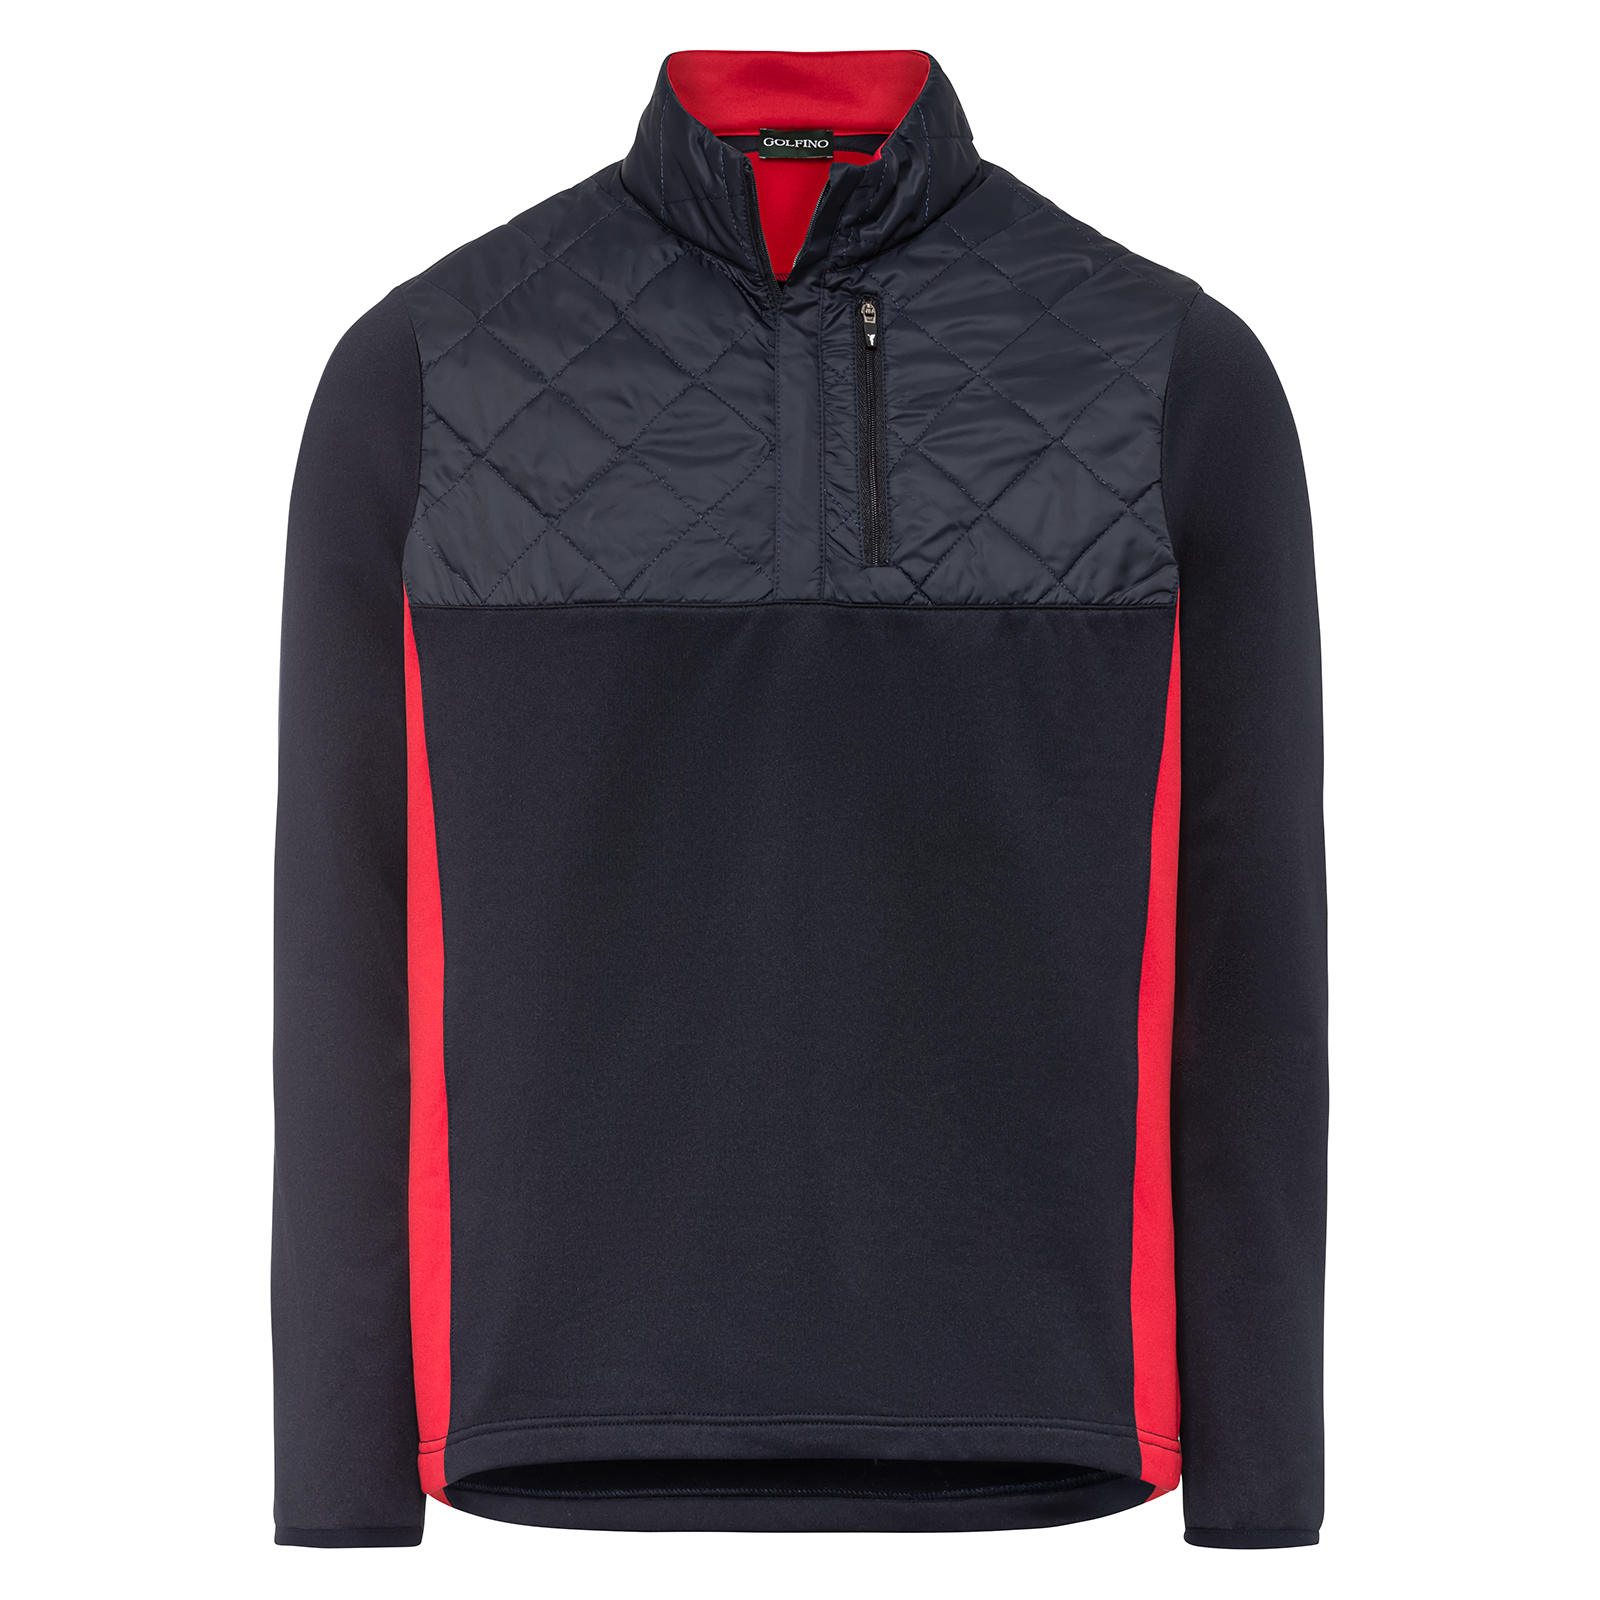 Men's functional half-zip hybrid golf sweater with cold weather protection